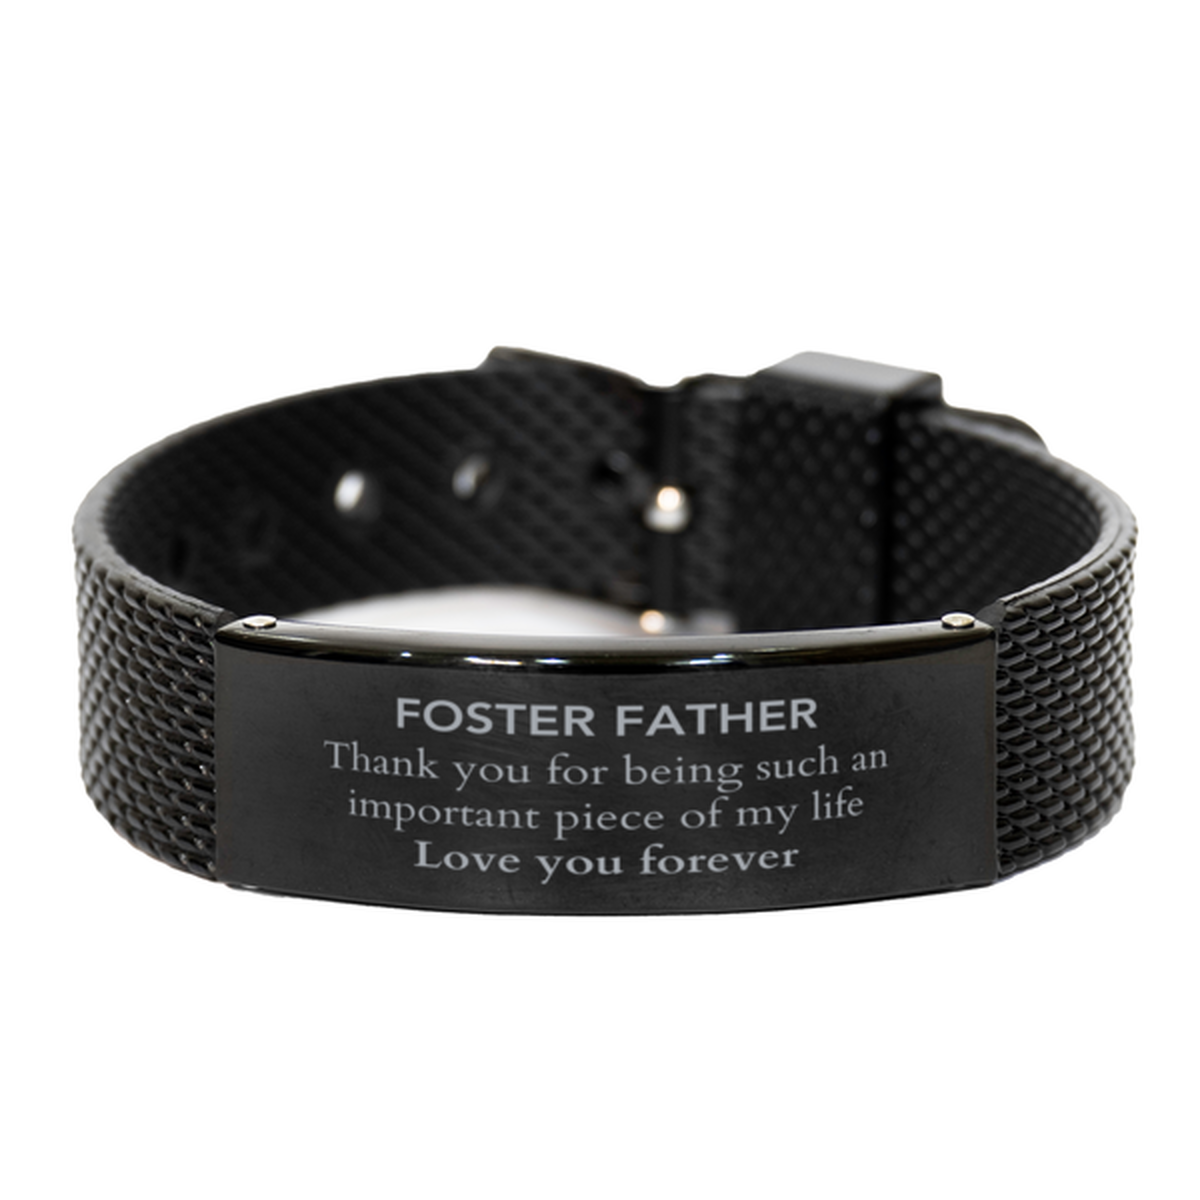 Appropriate Foster Father Black Shark Mesh Bracelet Epic Birthday Gifts for Foster Father Thank you for being such an important piece of my life Foster Father Christmas Mothers Fathers Day